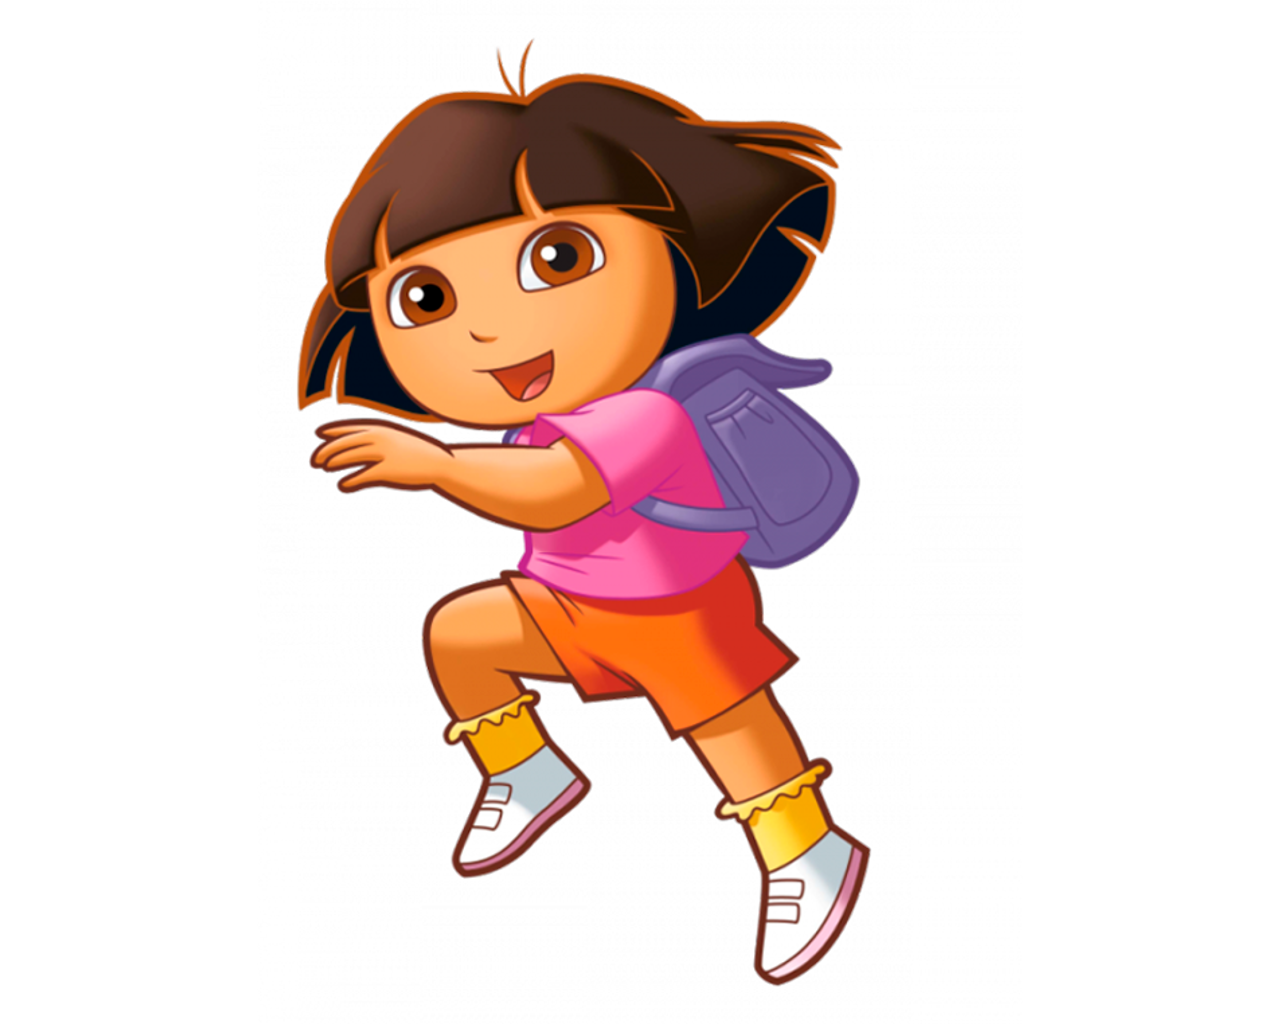 Female Cartoon Character PNG Image